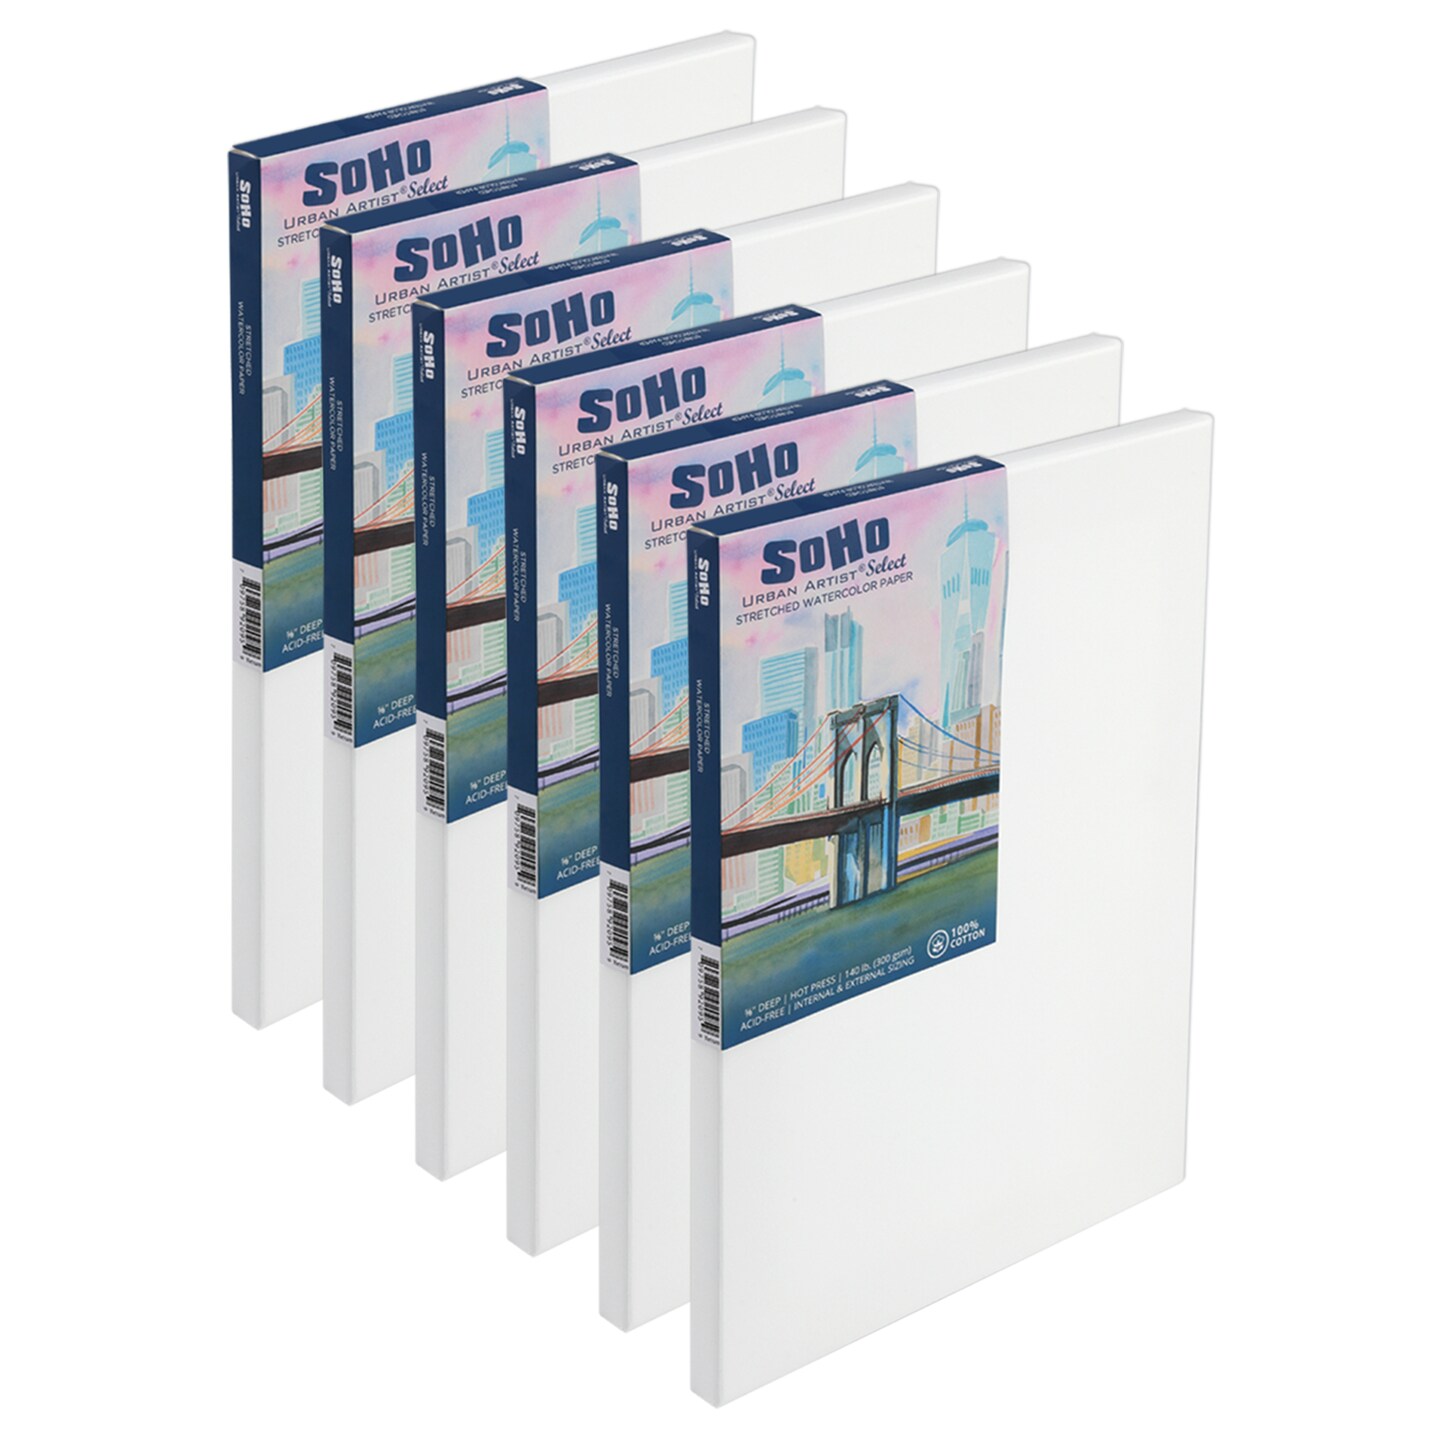 SoHo Urban Artist Select Stretched Cotton Watercolor Paper on 5/8&#x22; Frame - 140lb, 300gsm - 100% Acid-Free Cotton Paper for Mixed Media, Watercolor &#x26; More - Professional Artists, Students